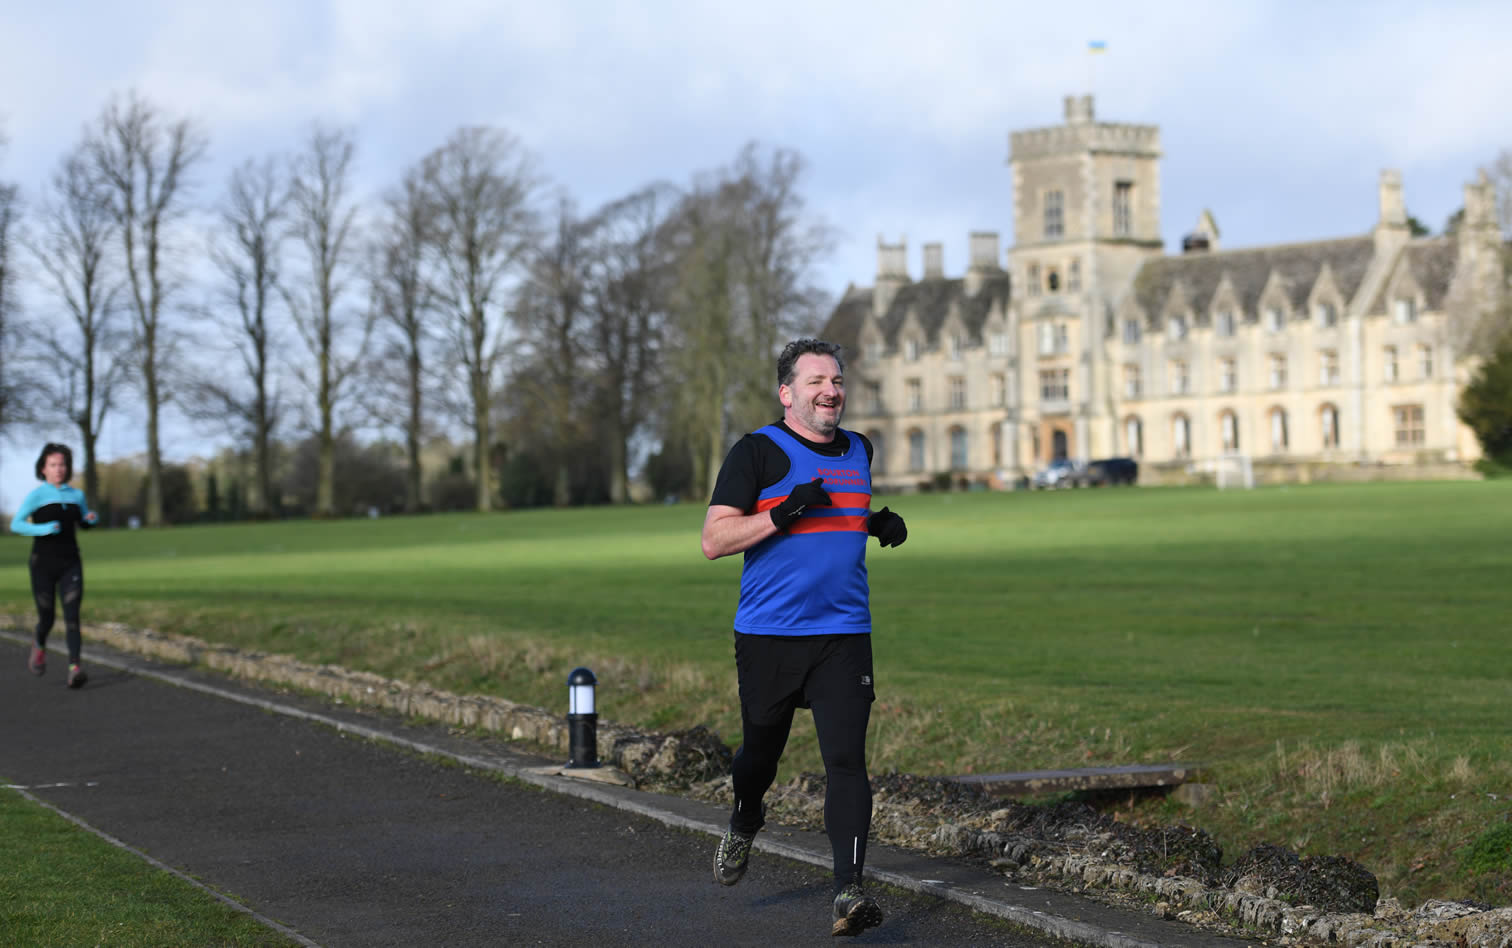 Barry O'Leary at Cirencester parkrun - 12th March 2022